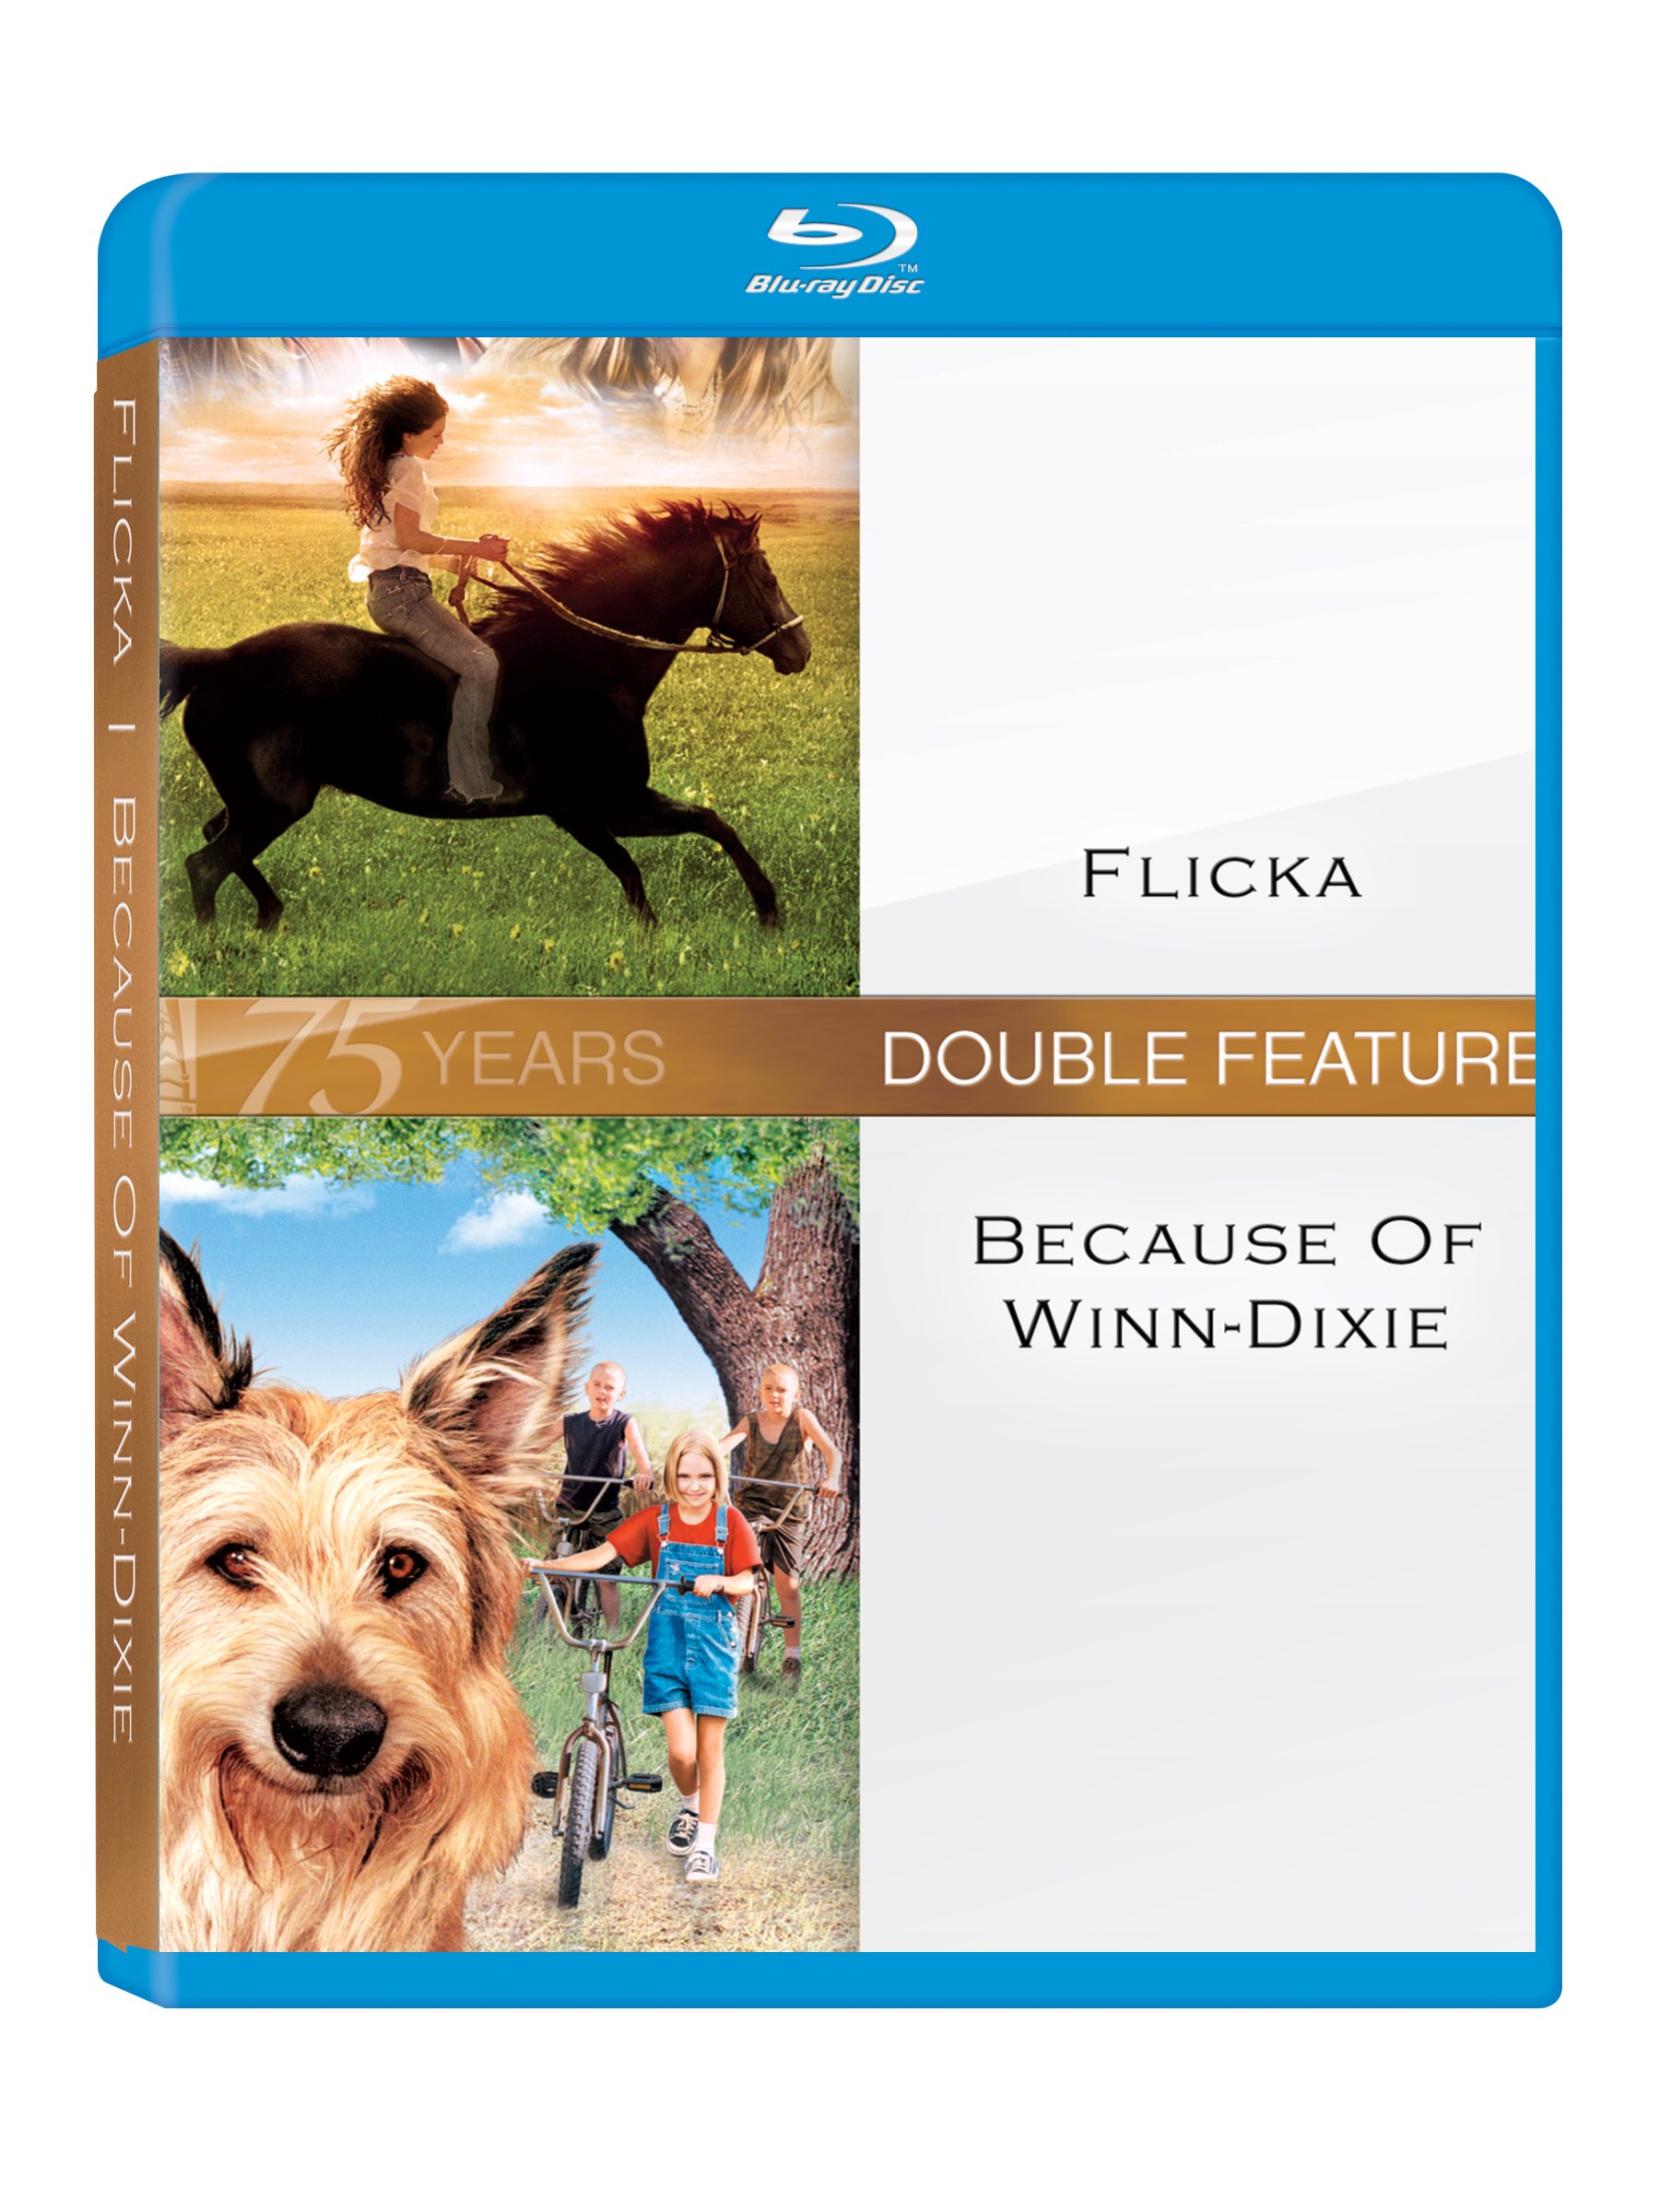 flicka-double-feature-2-movies-collection-flicka-because-of-winn-dixie-2-disc-box-set